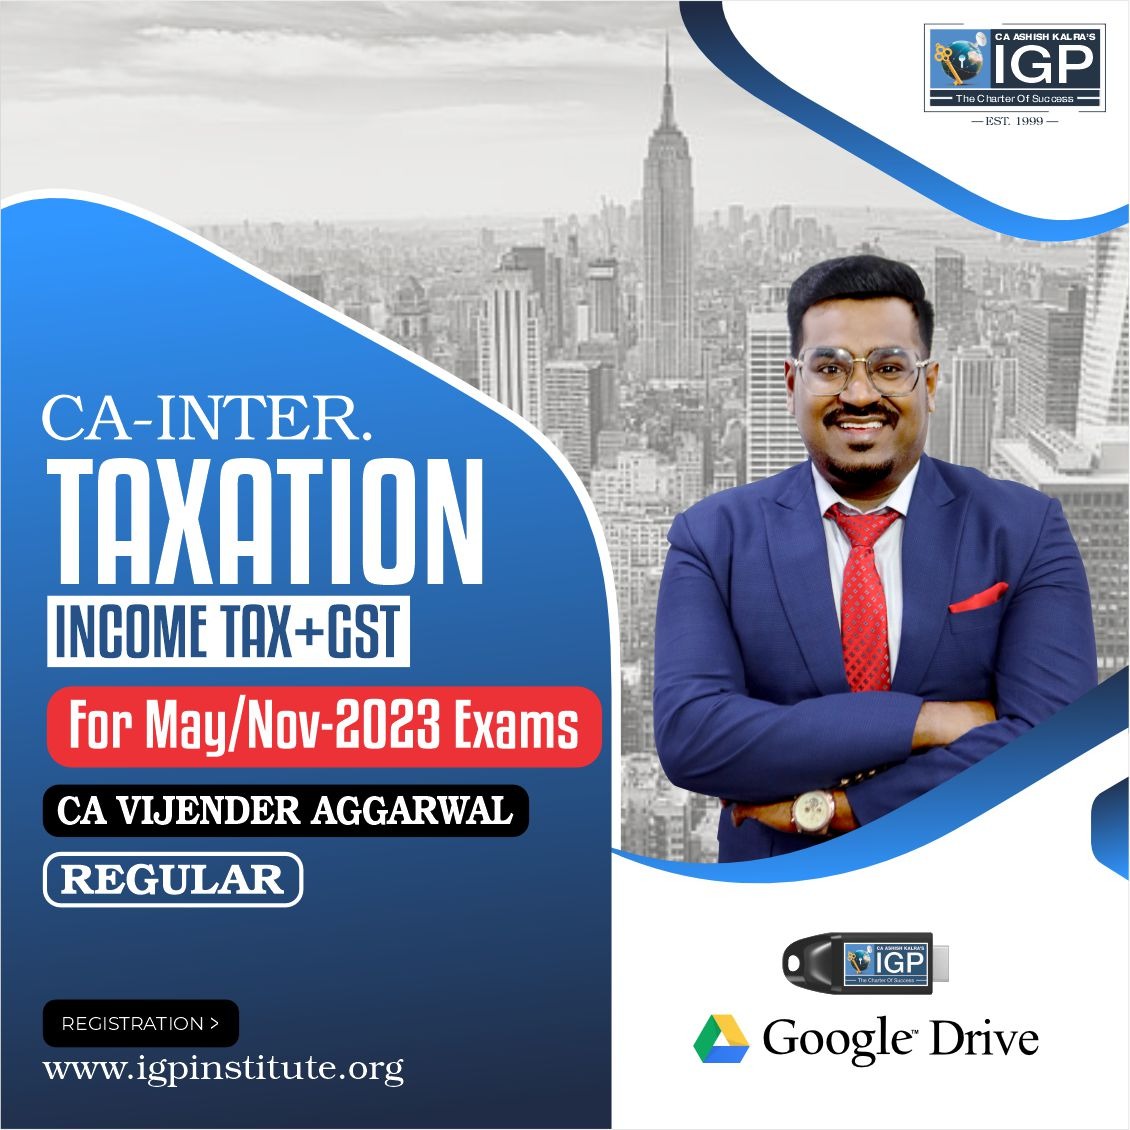 CA Inter - Taxation (Income Tax + GST) Full Course - May 2023 & Nov 2023 Exams-CA-INTER-Taxation (Income Tax + GST)- CA Vijender Aggarwal